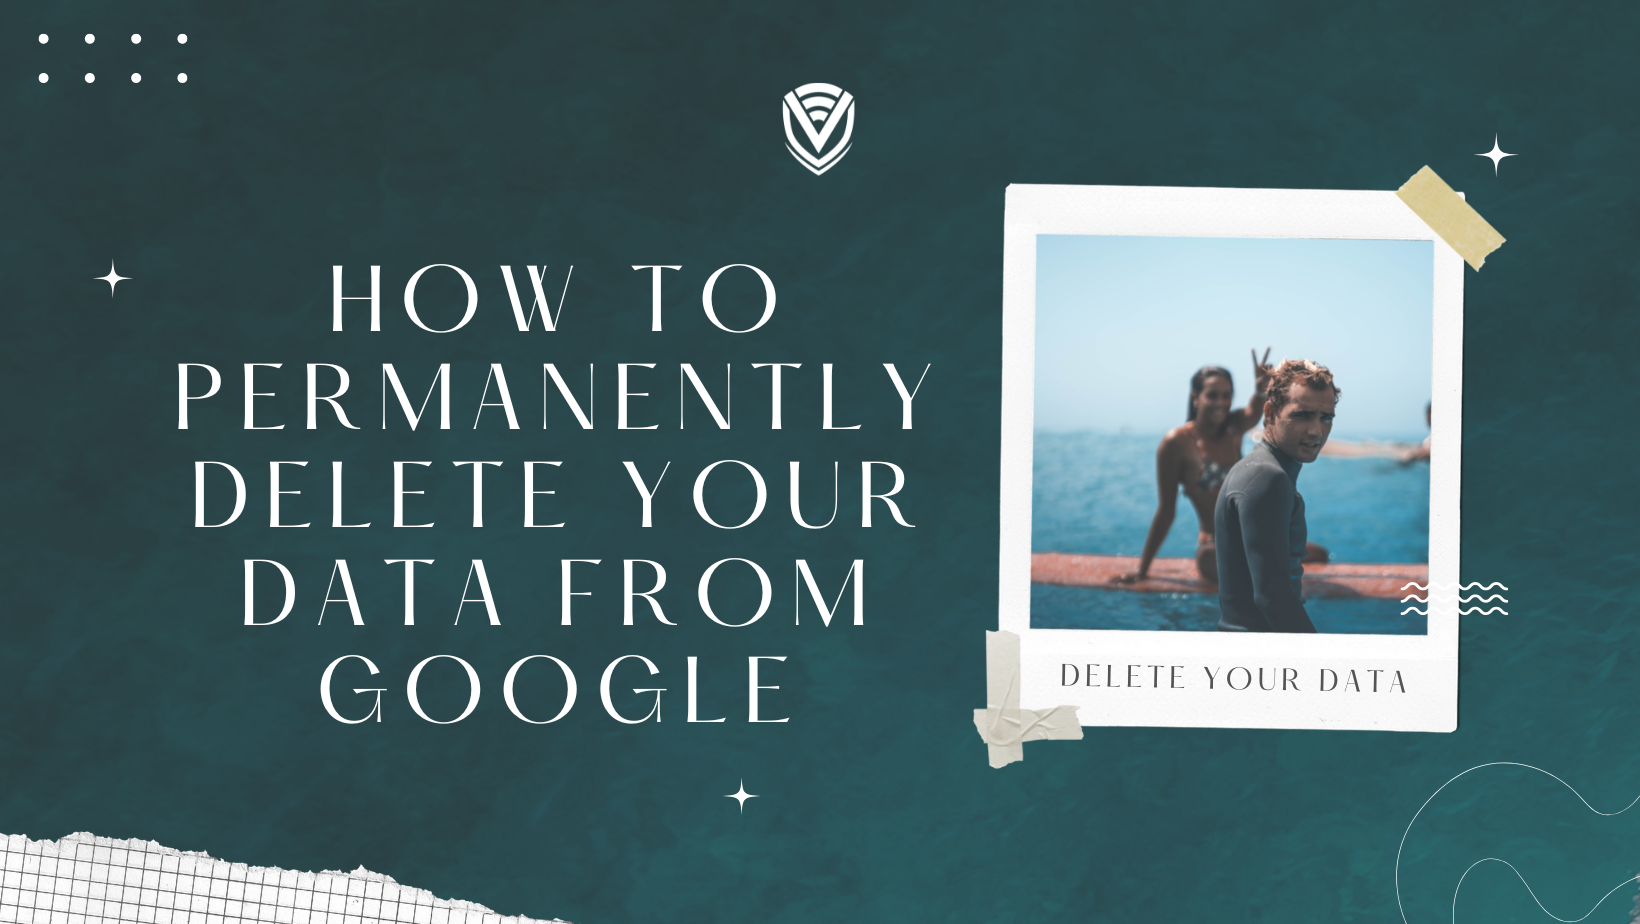 How To Permanently Delete Your Data From Google